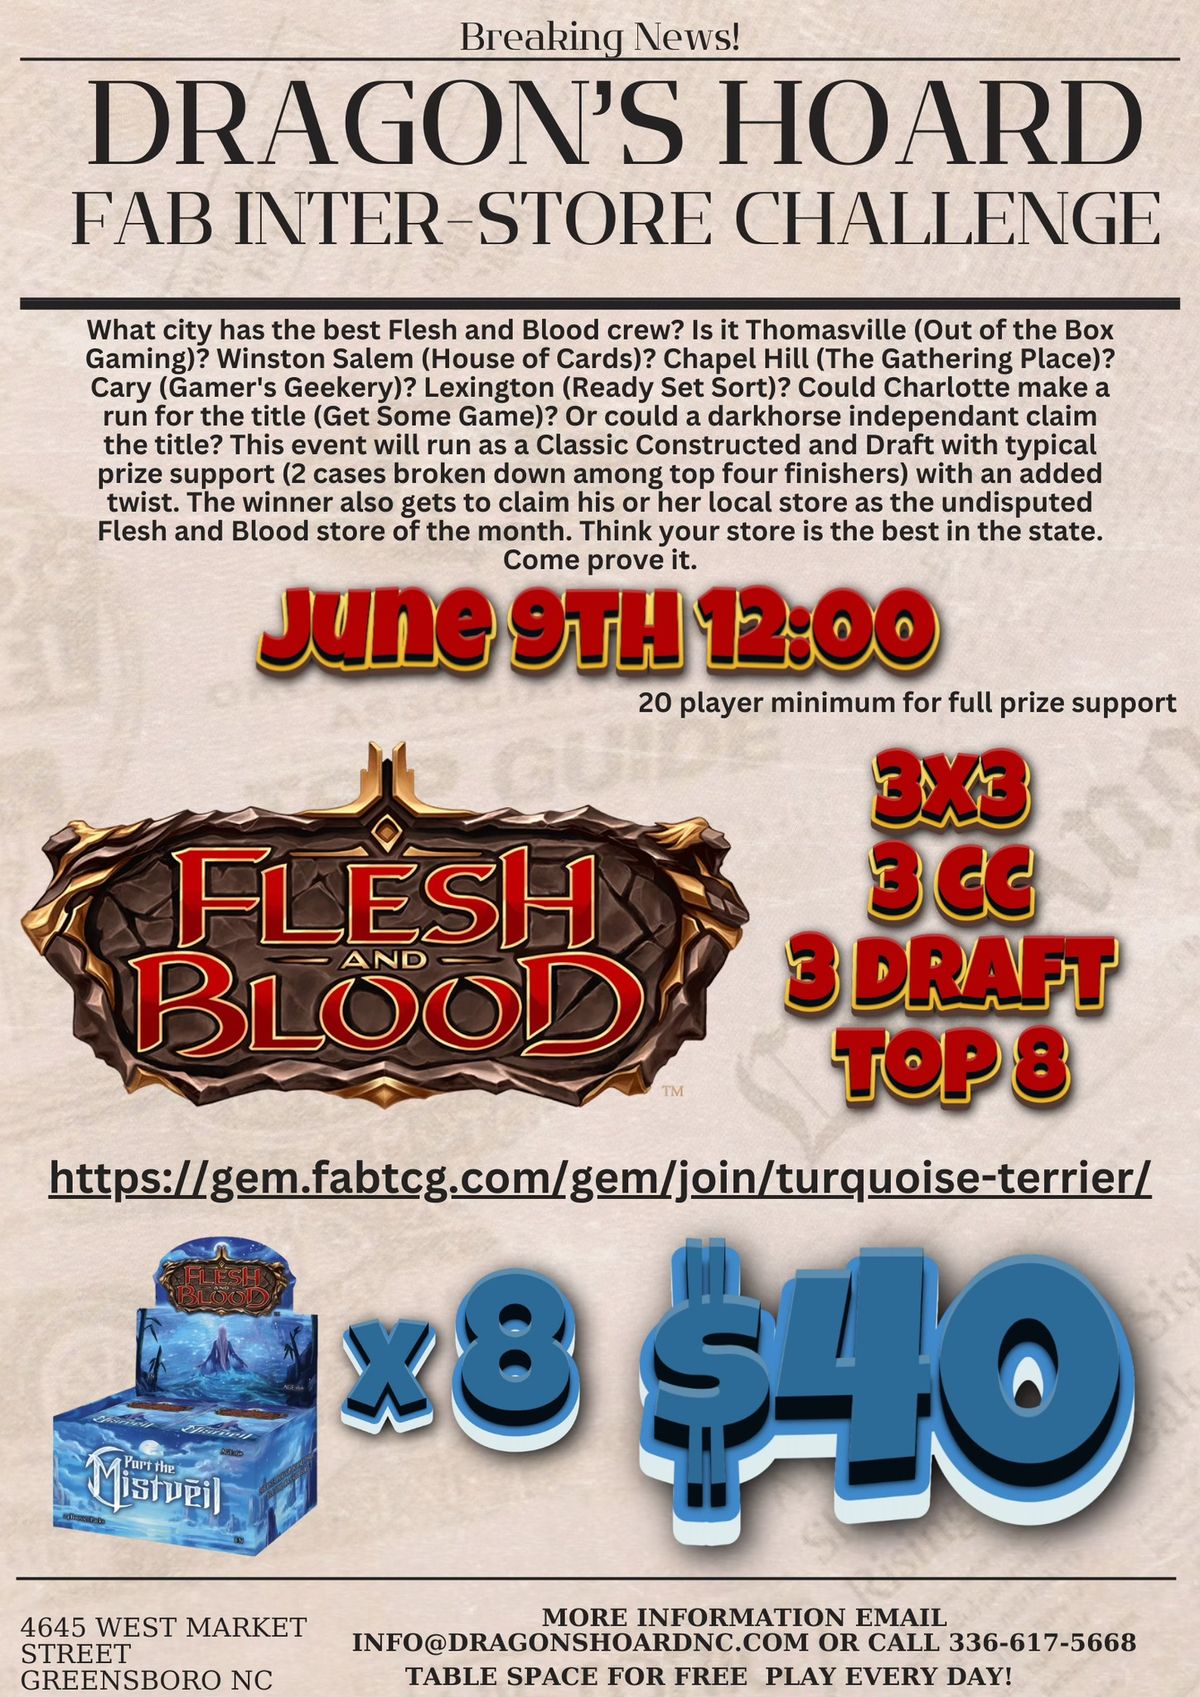 Flesh and Blood Inter-Store NC 2 Case Mistveil Armory June 9th 12:00